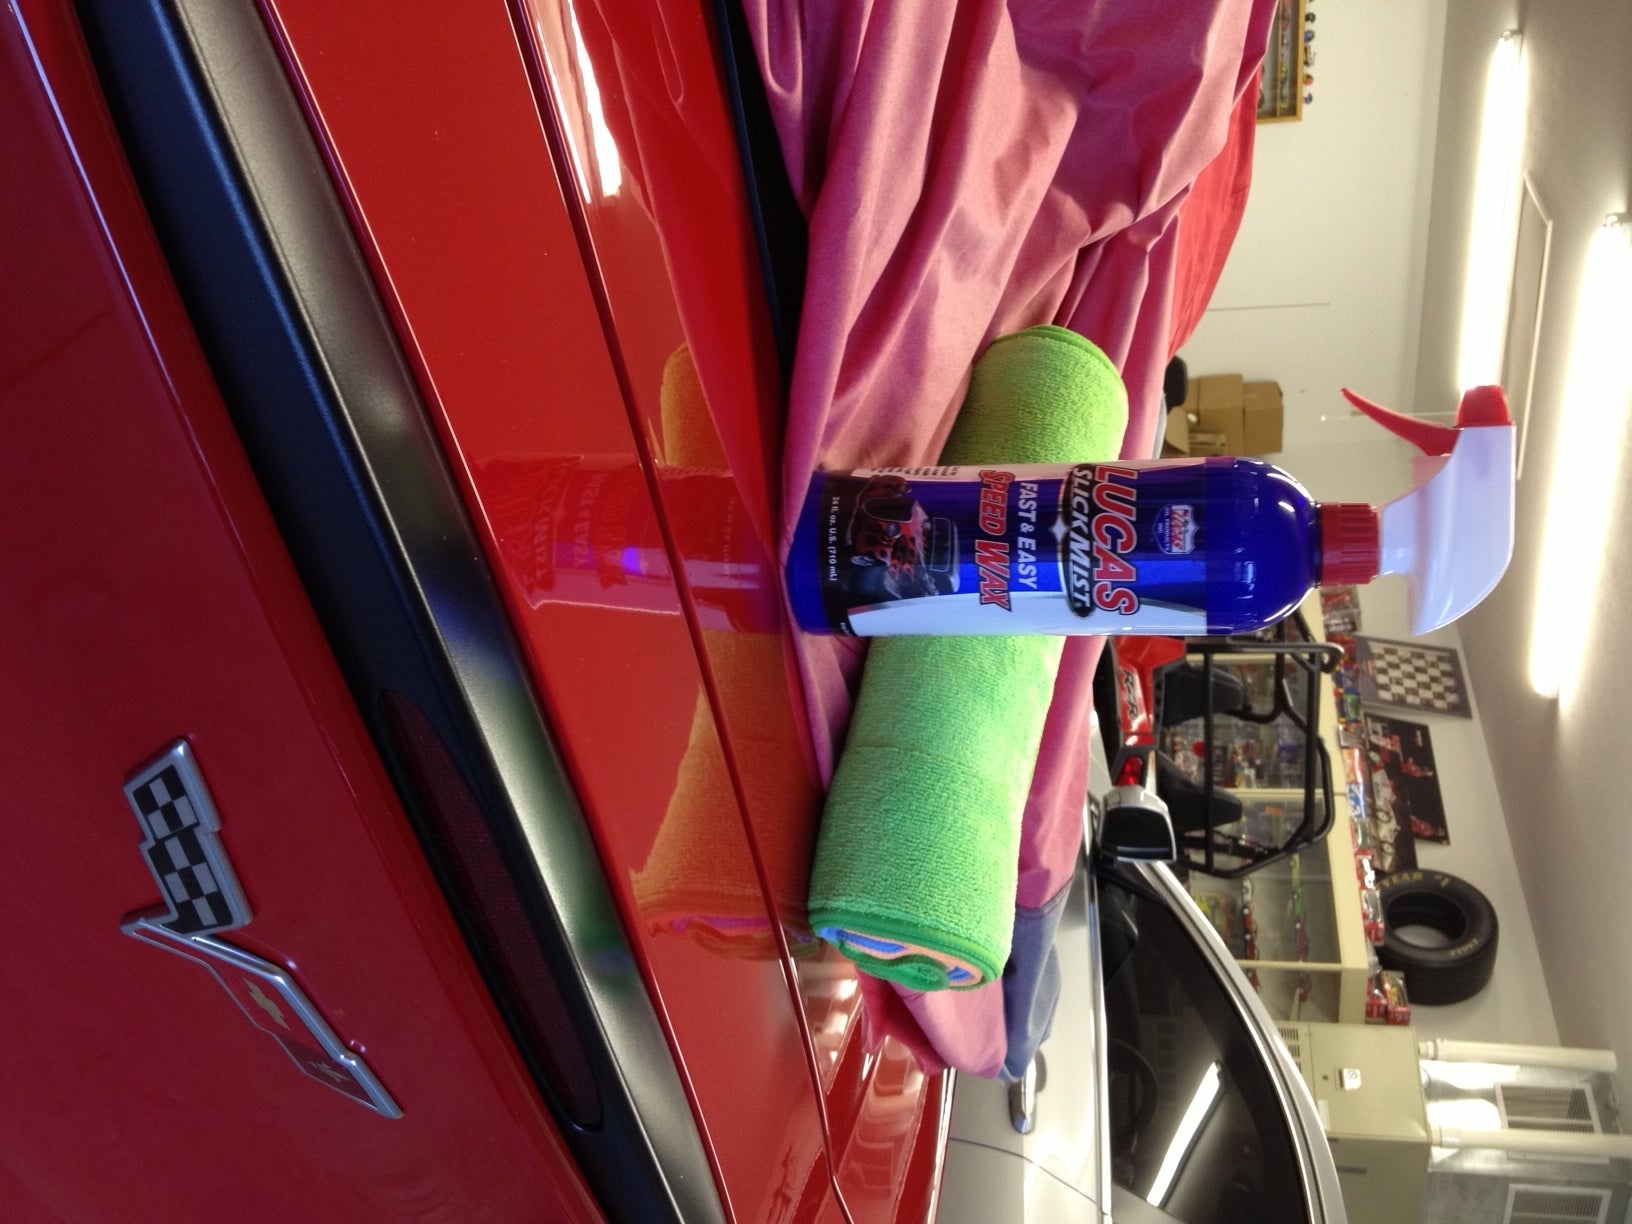 We use Lucas Slick Mist Speed Wax exclusively with an auto detail